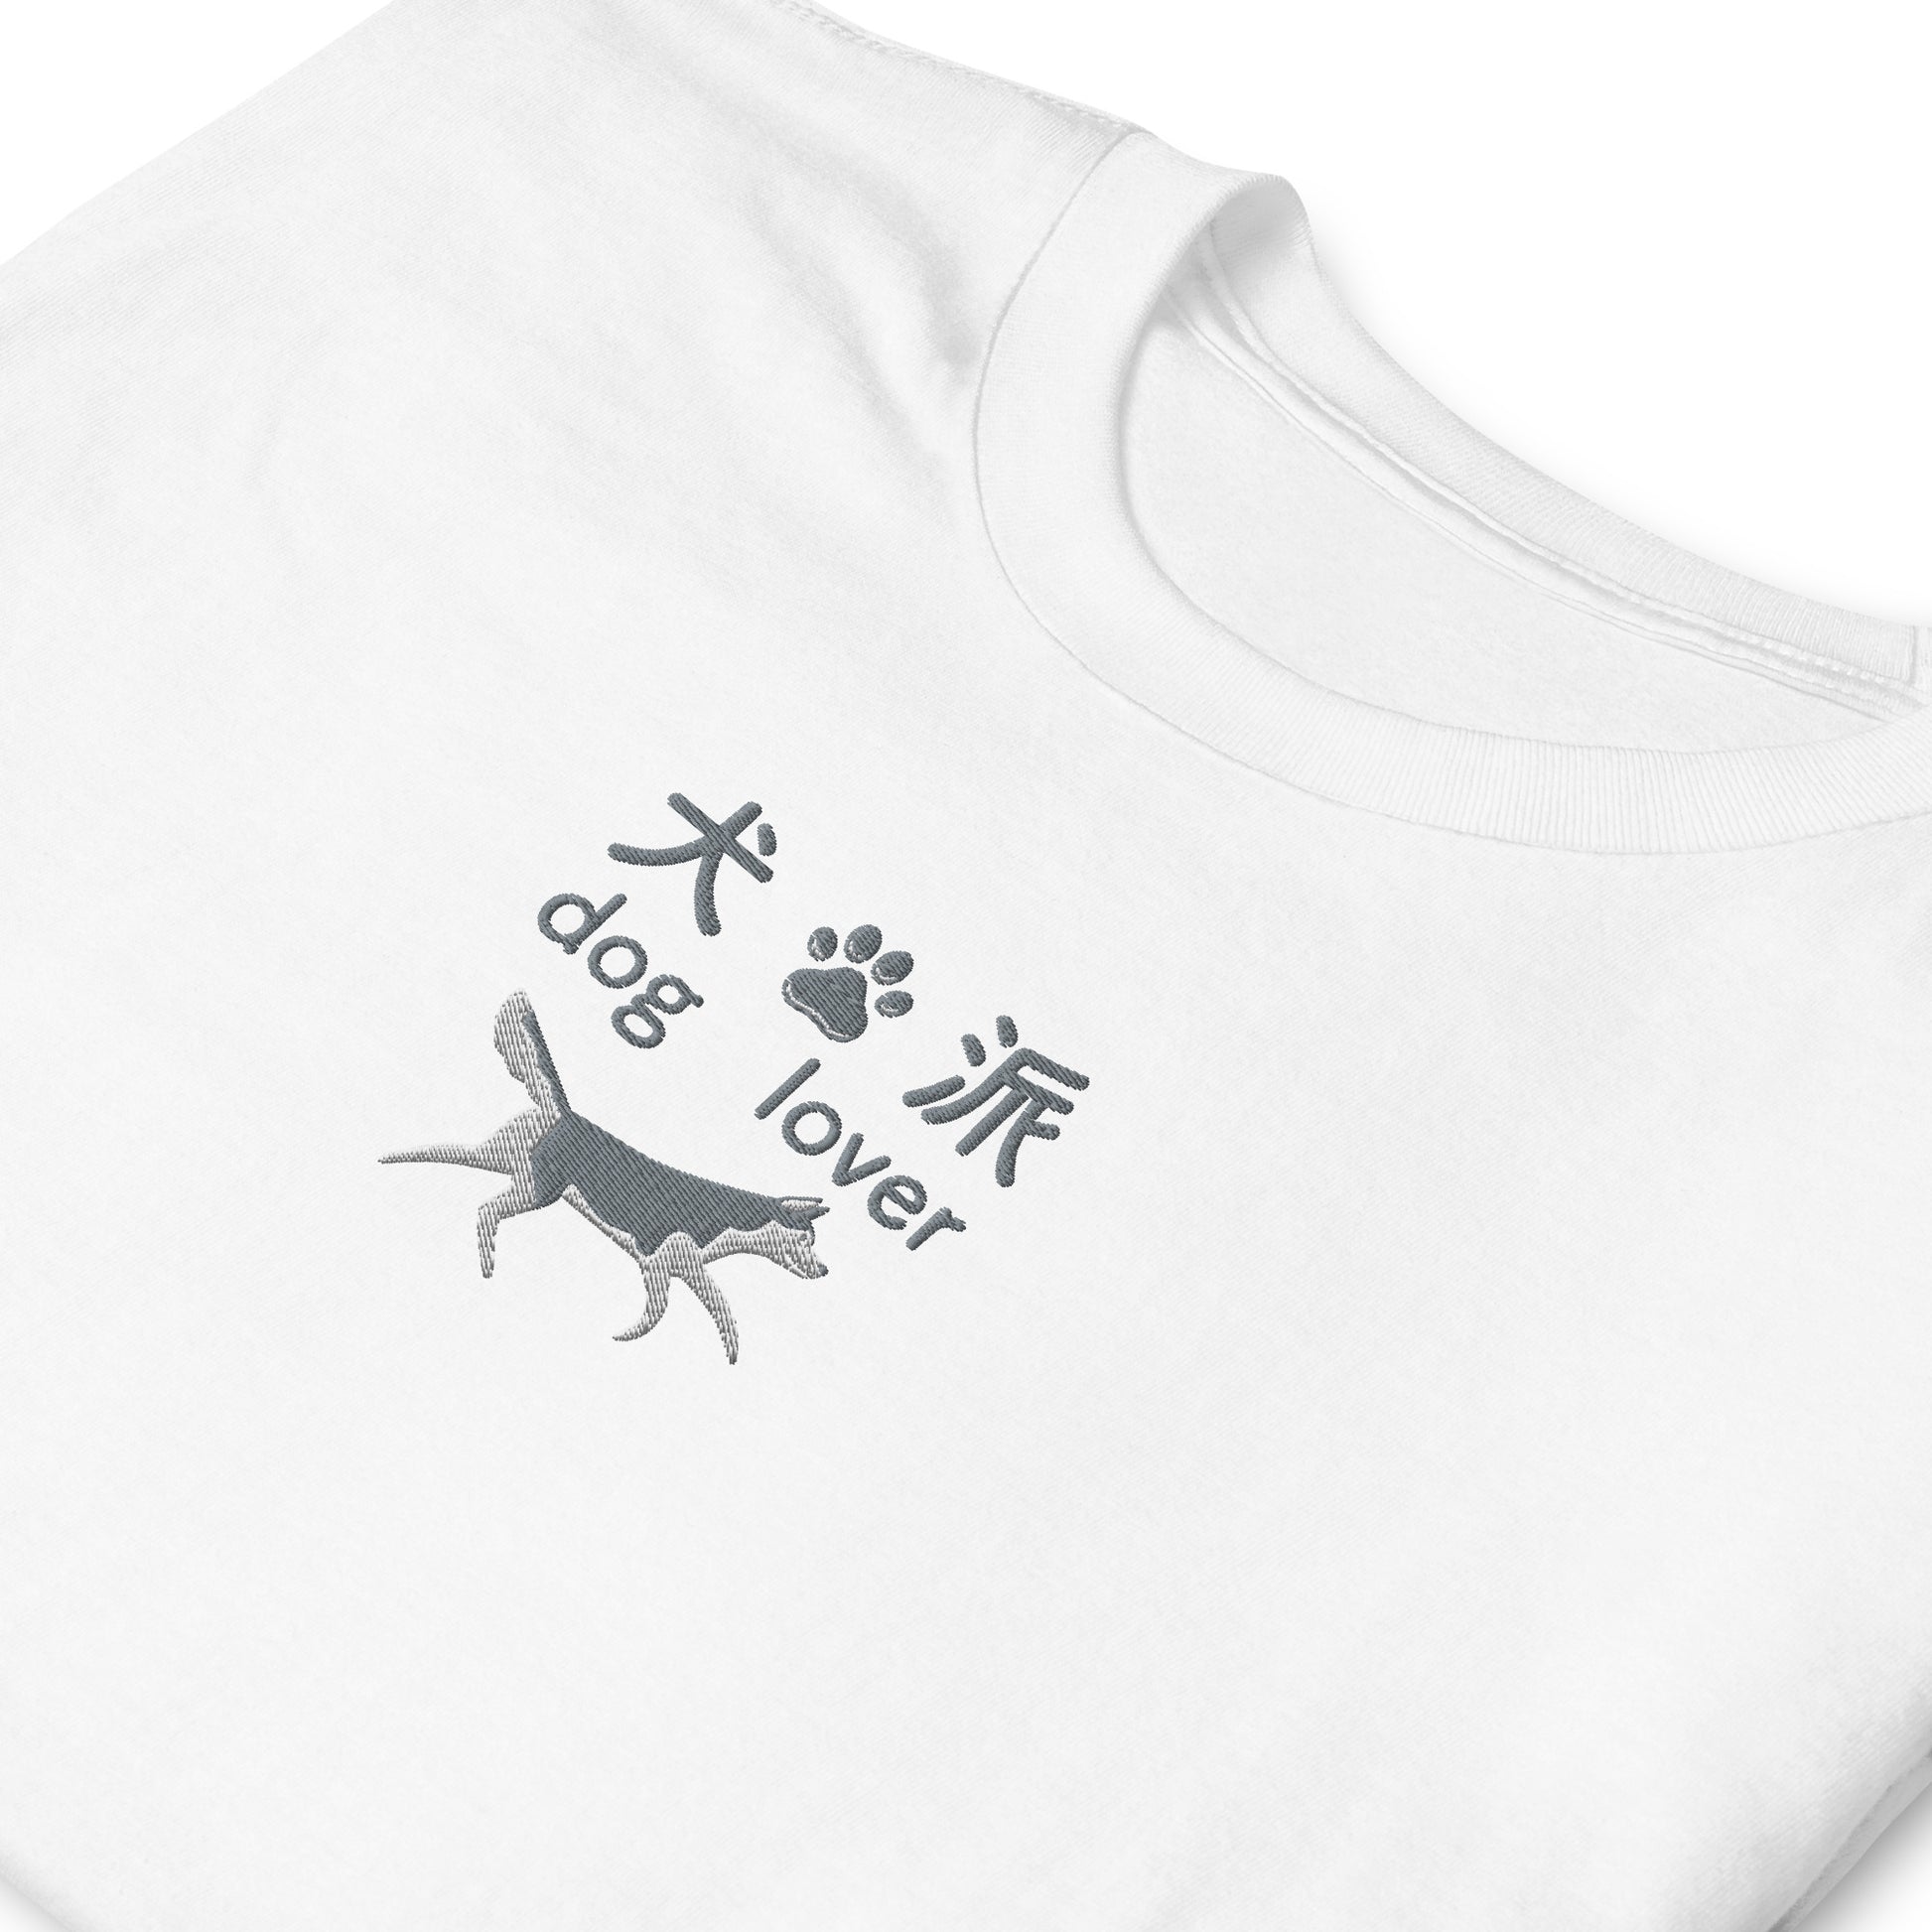 White High Quality Tee - Front Design with an Gray, White Embroidery "Dog Lover" in Japanese,Chinese and English, and Dog Embroidery